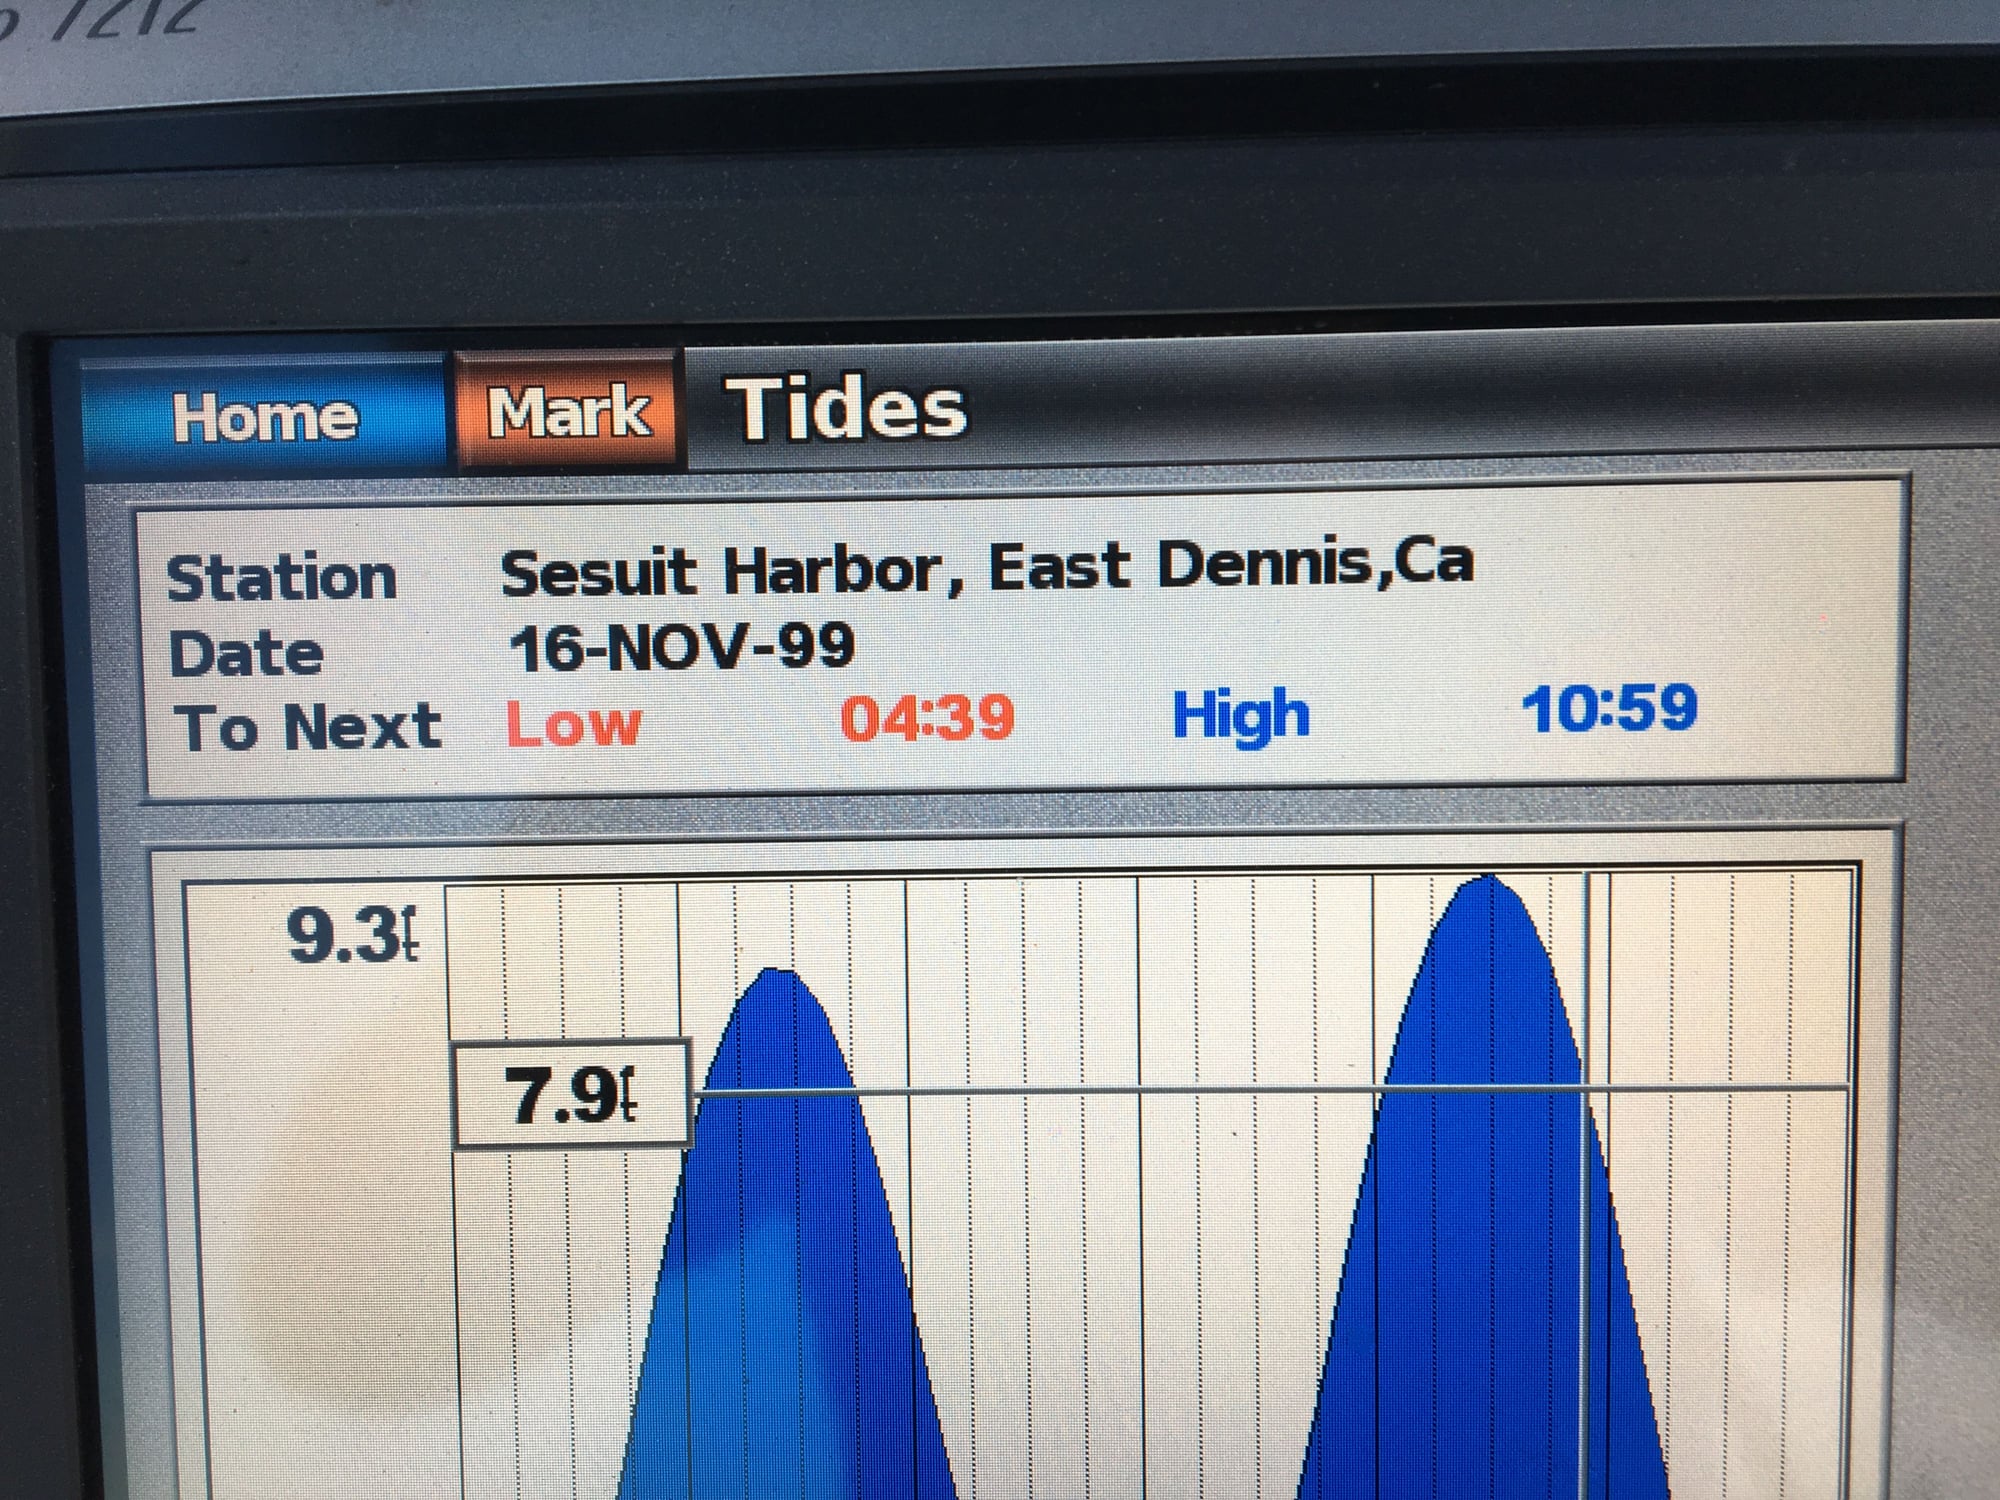 Garmin 7212 tide chart issue The Hull Truth Boating and Fishing Forum